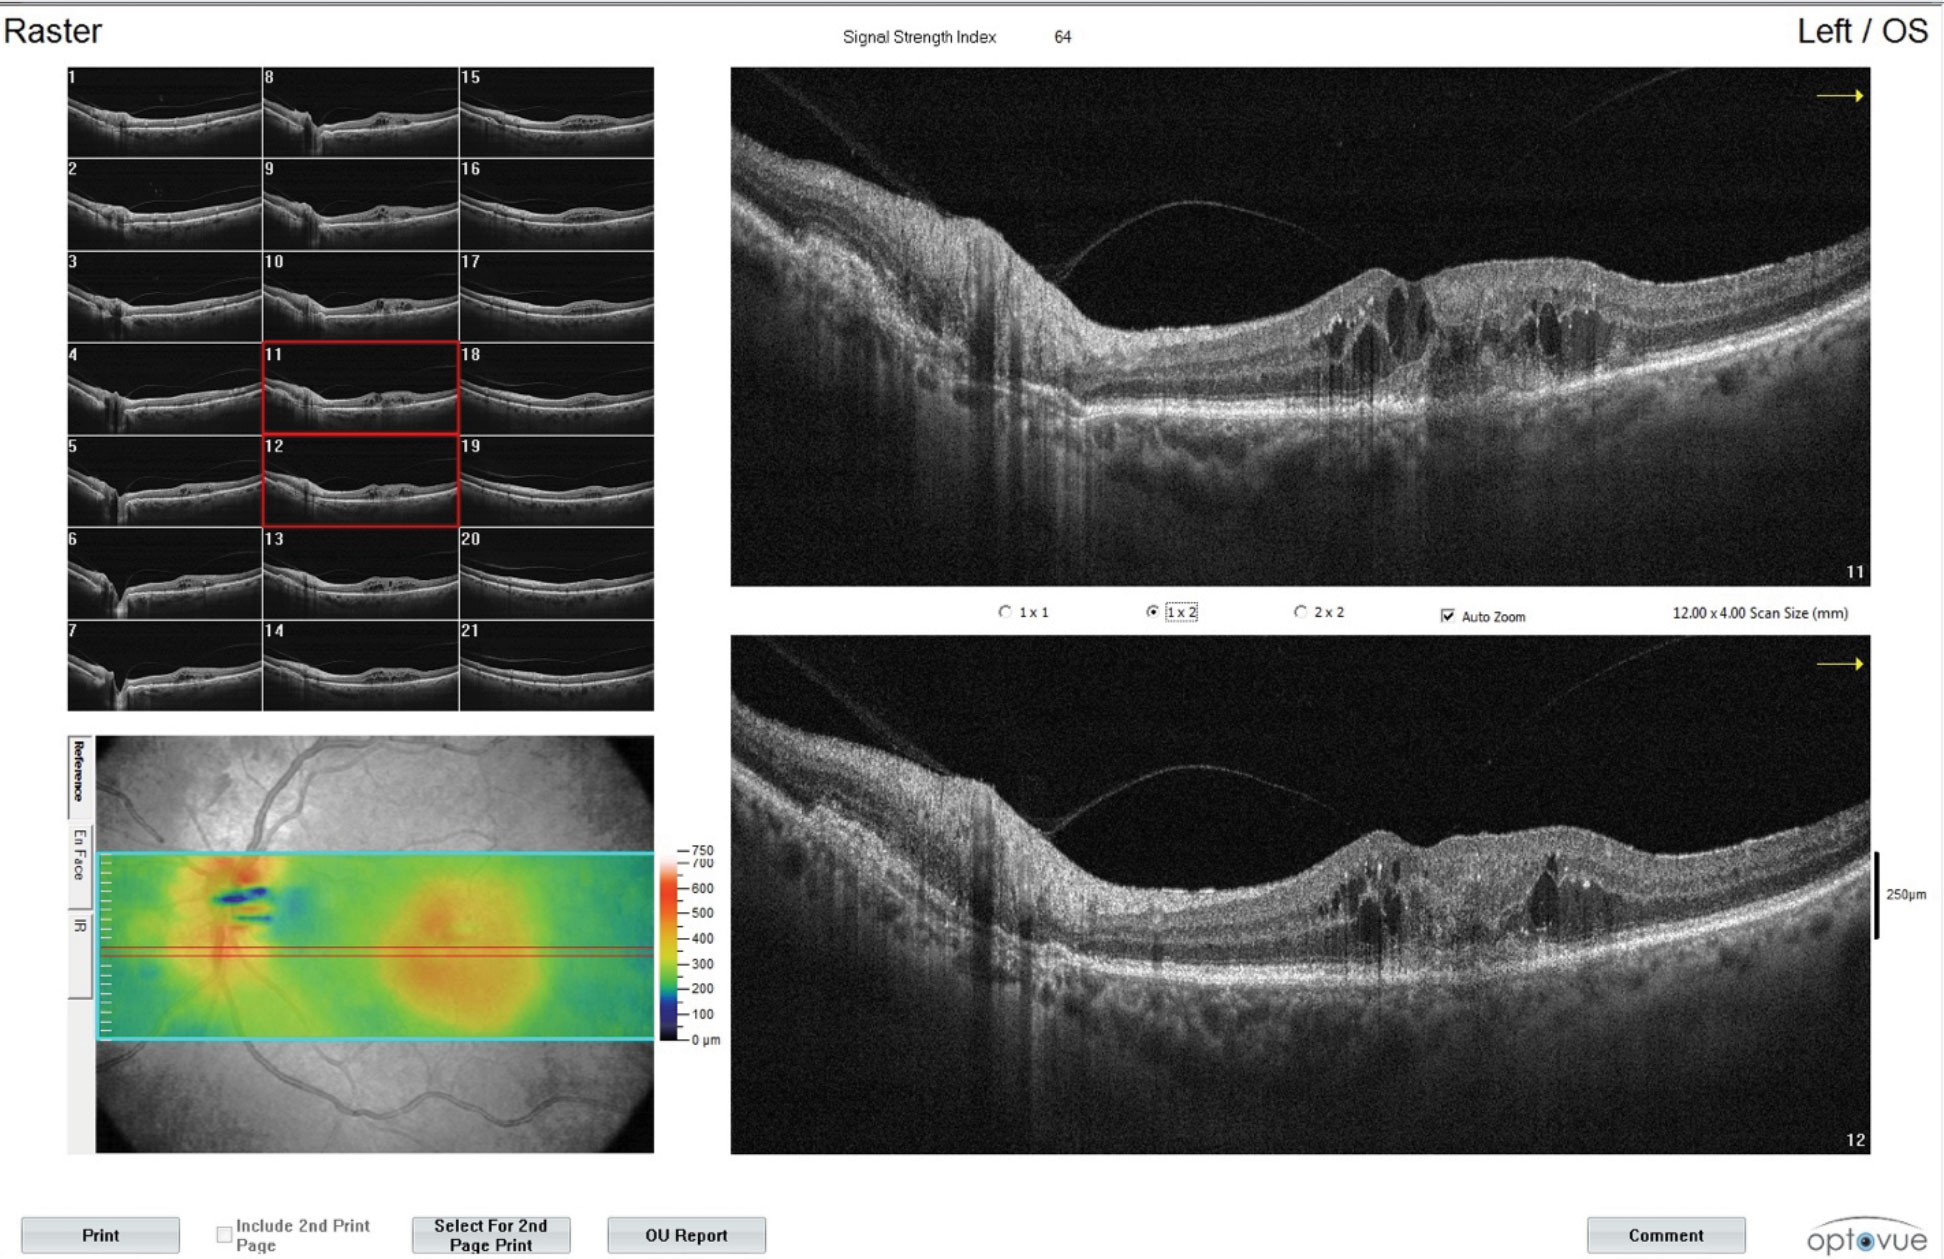 These images show additional findings from the CNVM patient with intraretinal fluid in the left eye. Monitoring is a key part of the OD’s role in managing patients undergoing anti-VEGF shots.